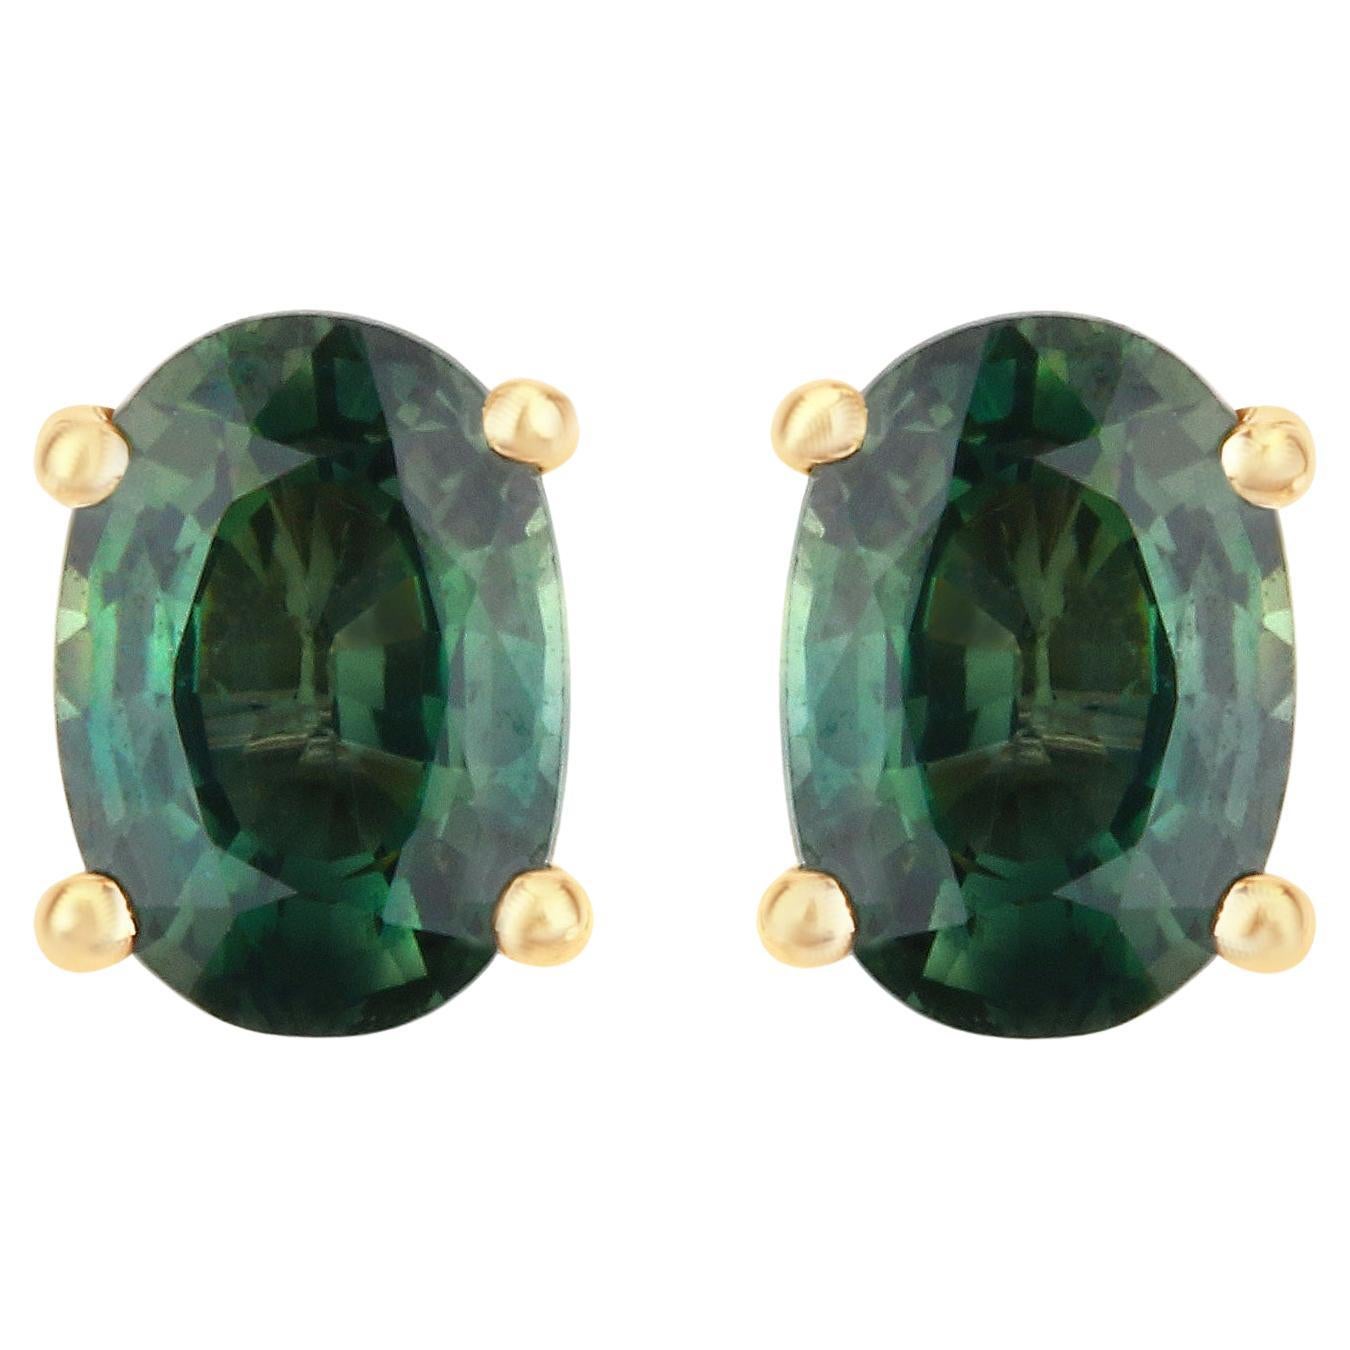 Green Sapphire Stud Earrings 1.16 Carats Total 14K Yellow Gold For Sale